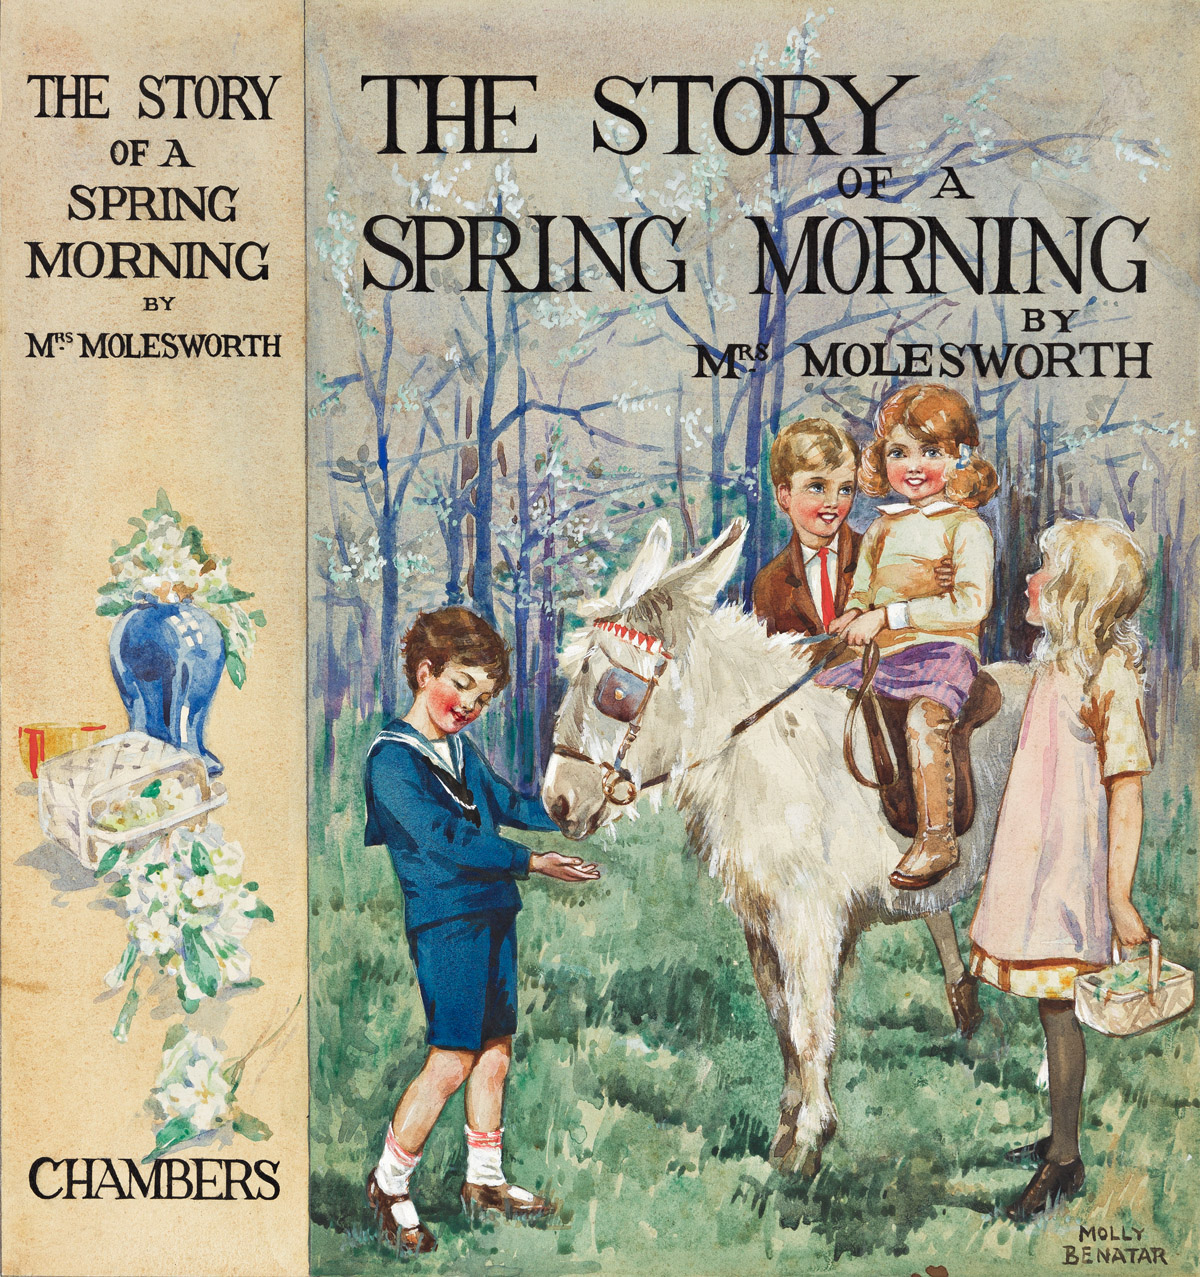 MOLLY BENATAR (early 20th Century) The Story of a Spring Morning. [BOOK JACKET DESIGN / CHILDRENS]